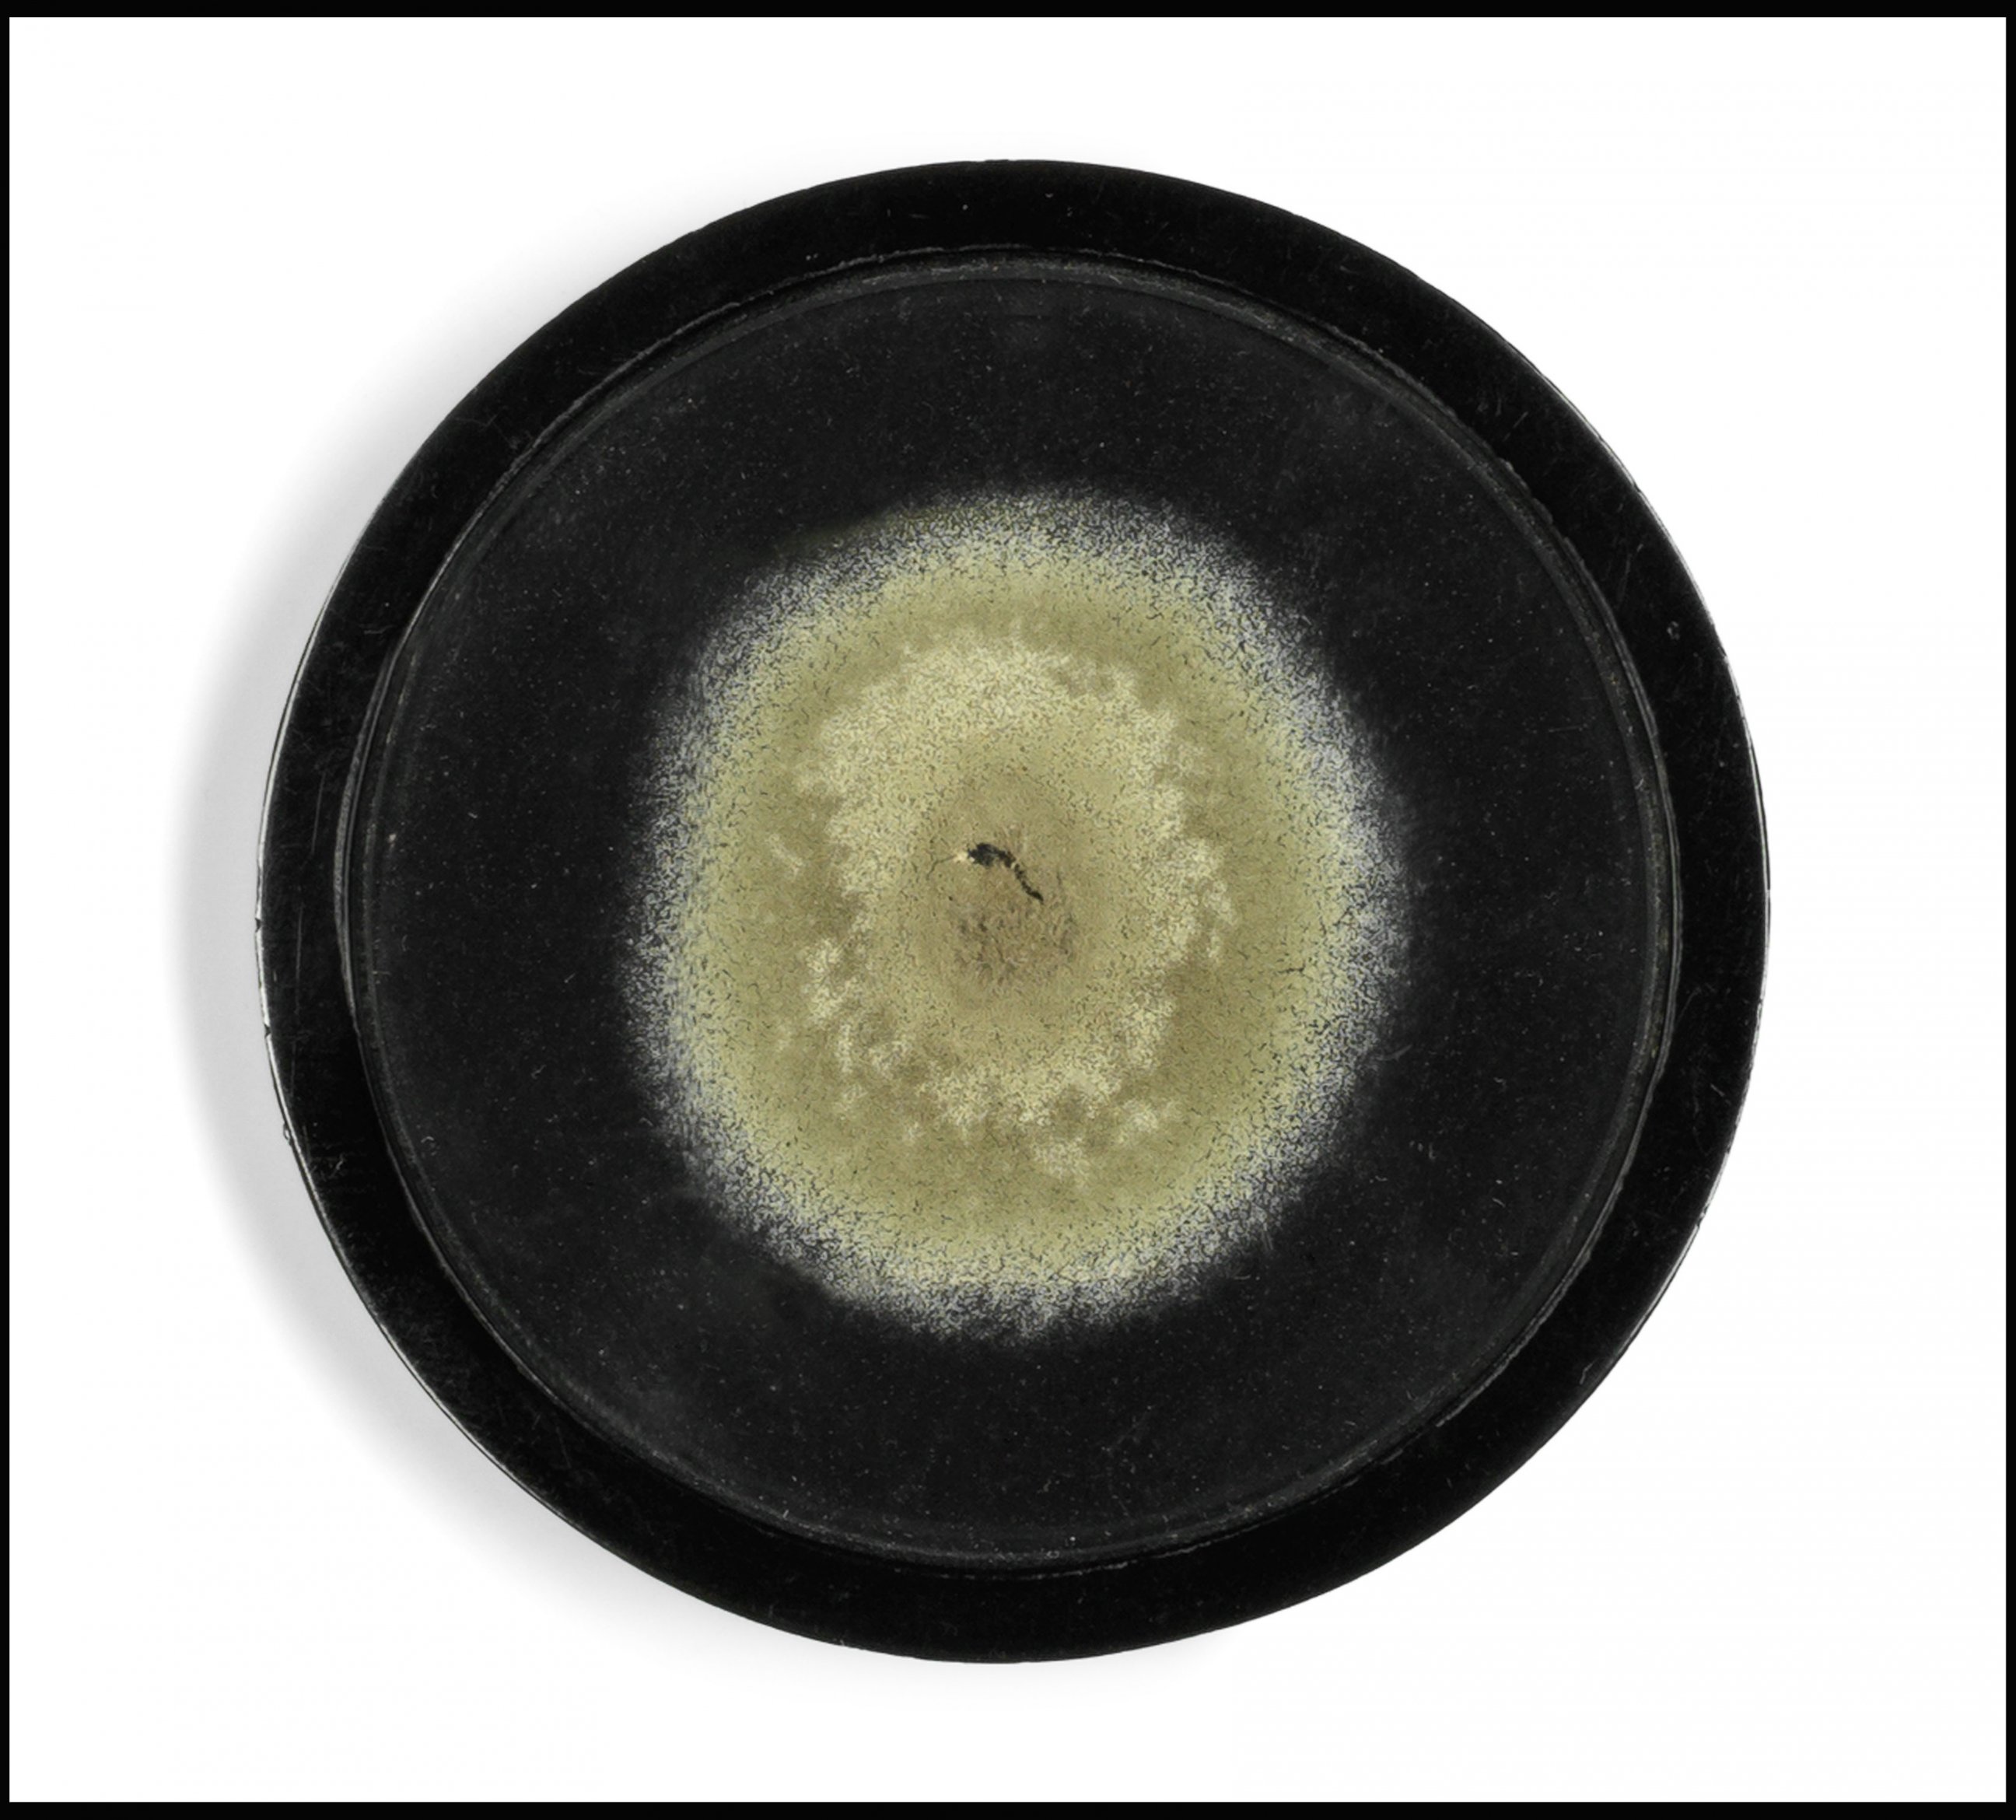 PHOTO: Two samples of mould that Sir Alexander Fleming used to produce yellow-green Penicillium Notatum fungus, are contained on a glass disc and date back to the 1930's when Fleming was developing his 1928 discovery of penicillin.